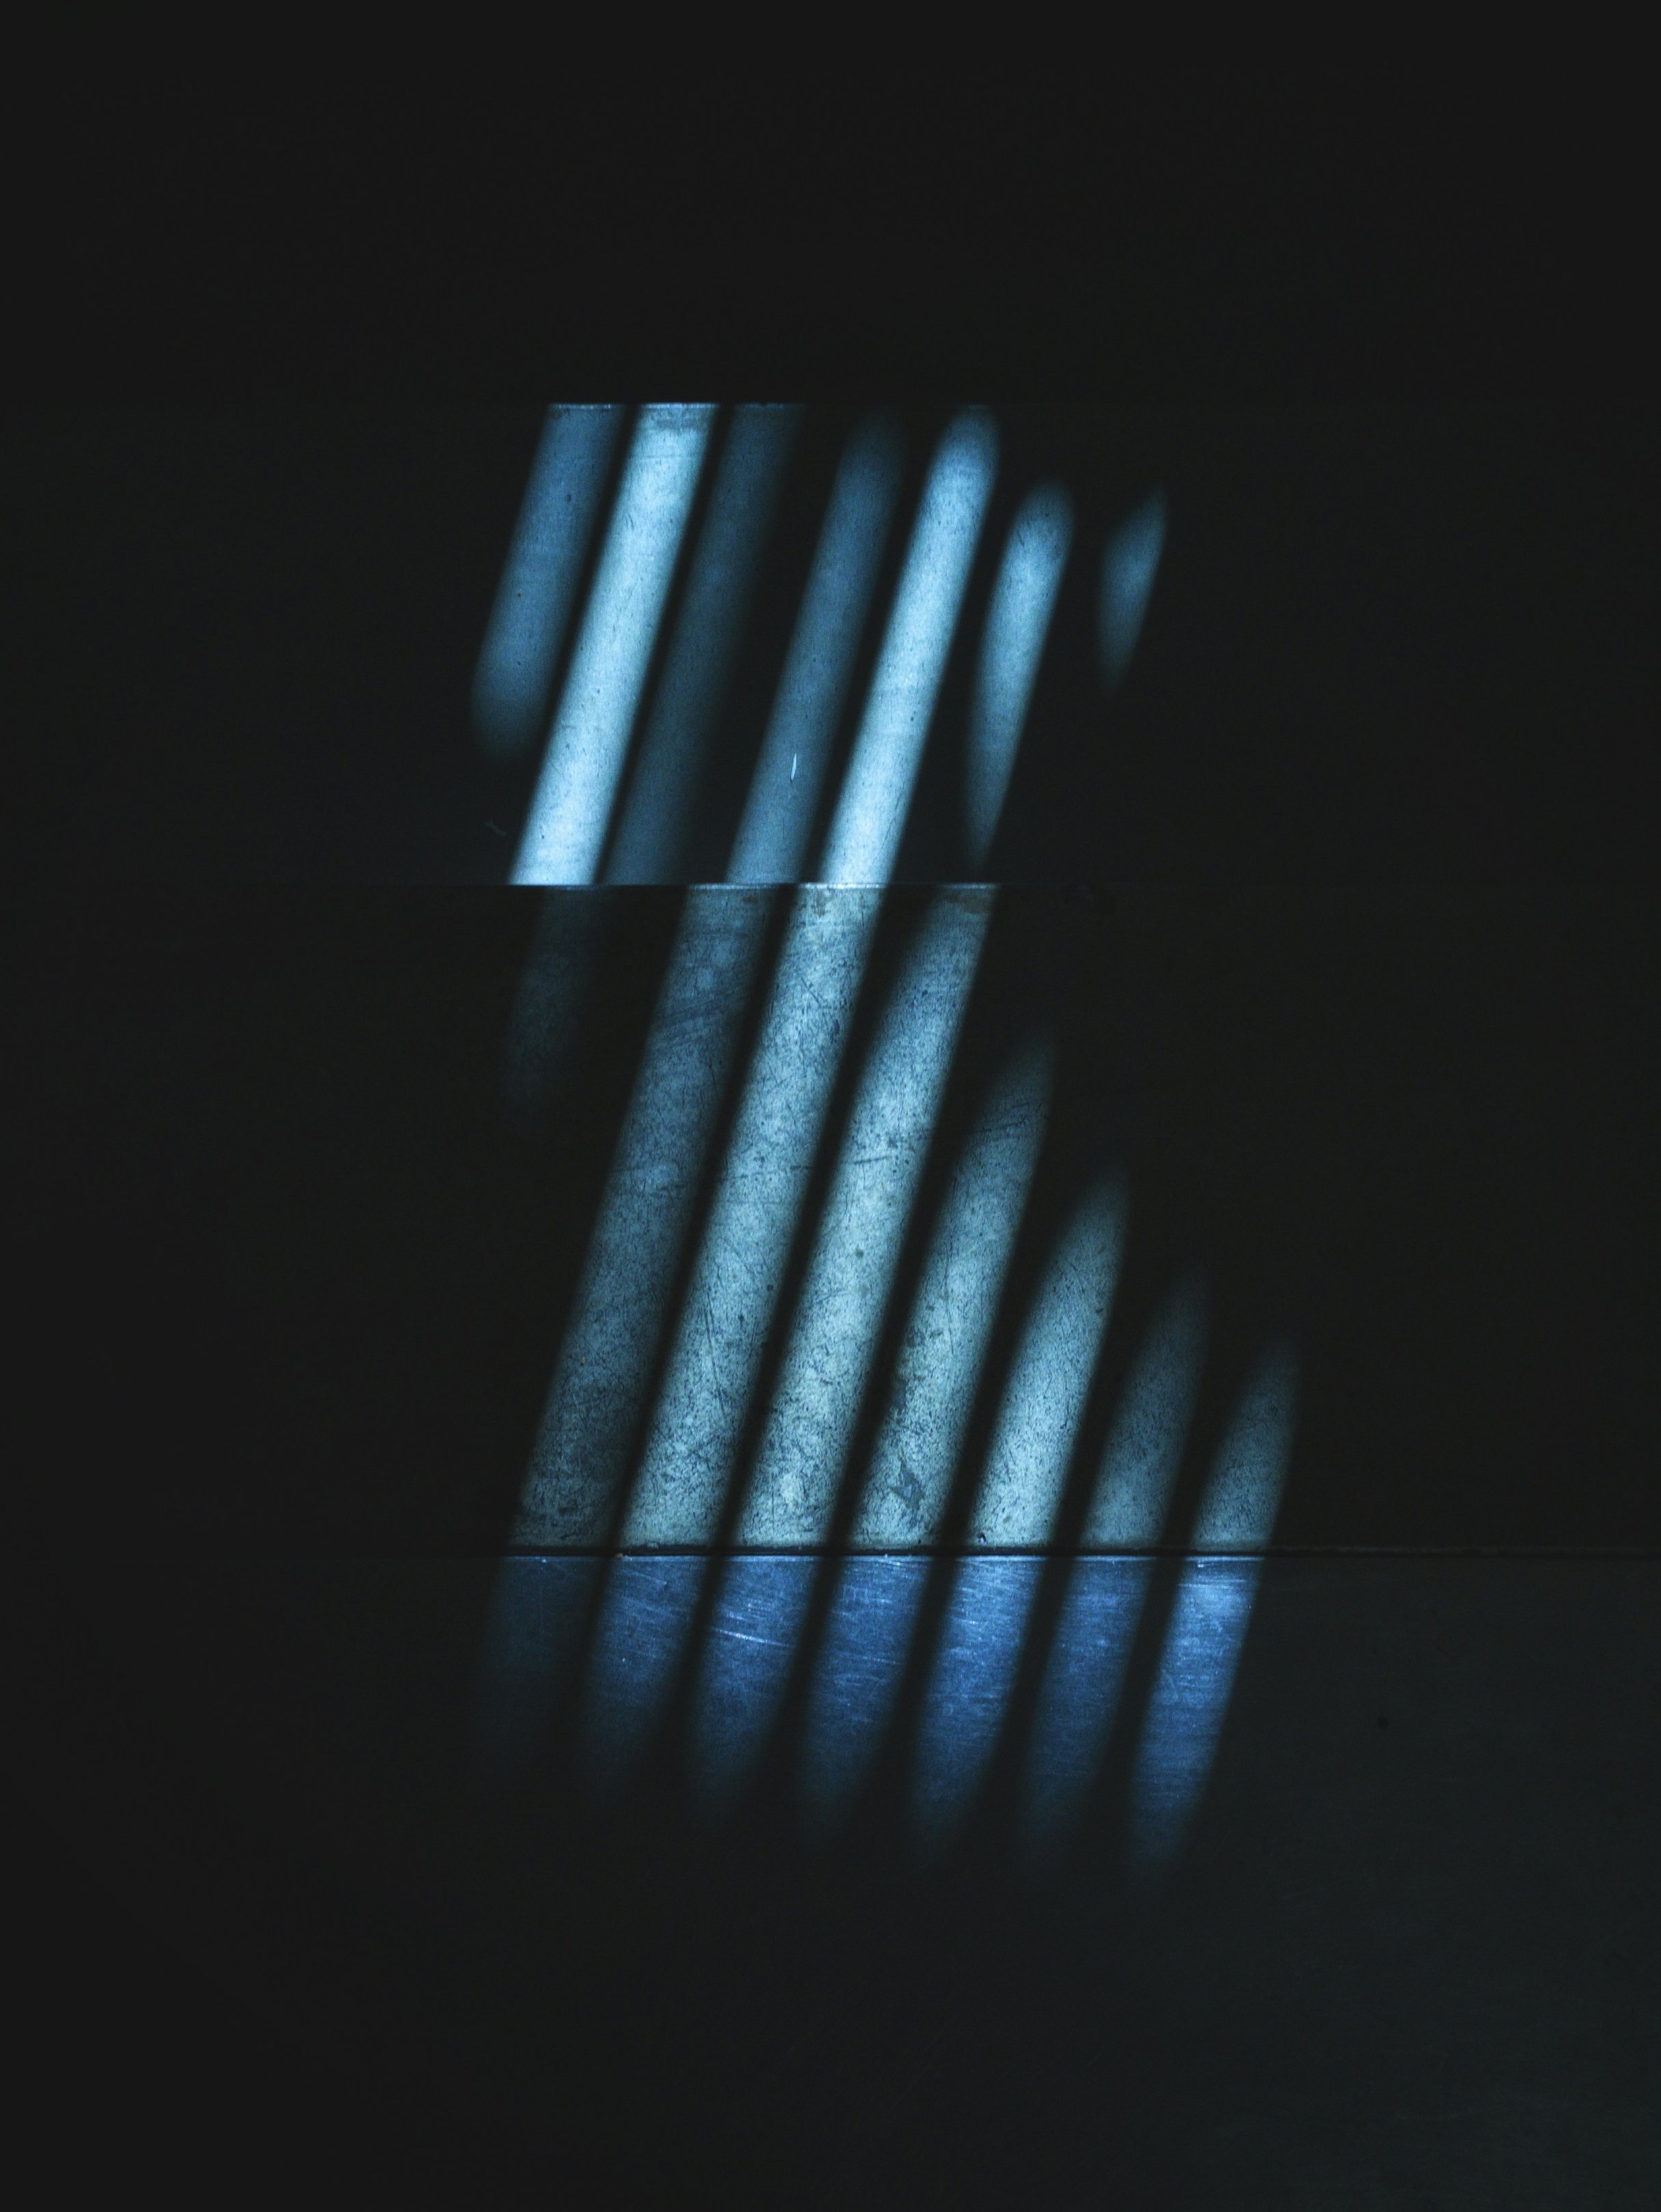 Light stripes on a dark background created by shadows